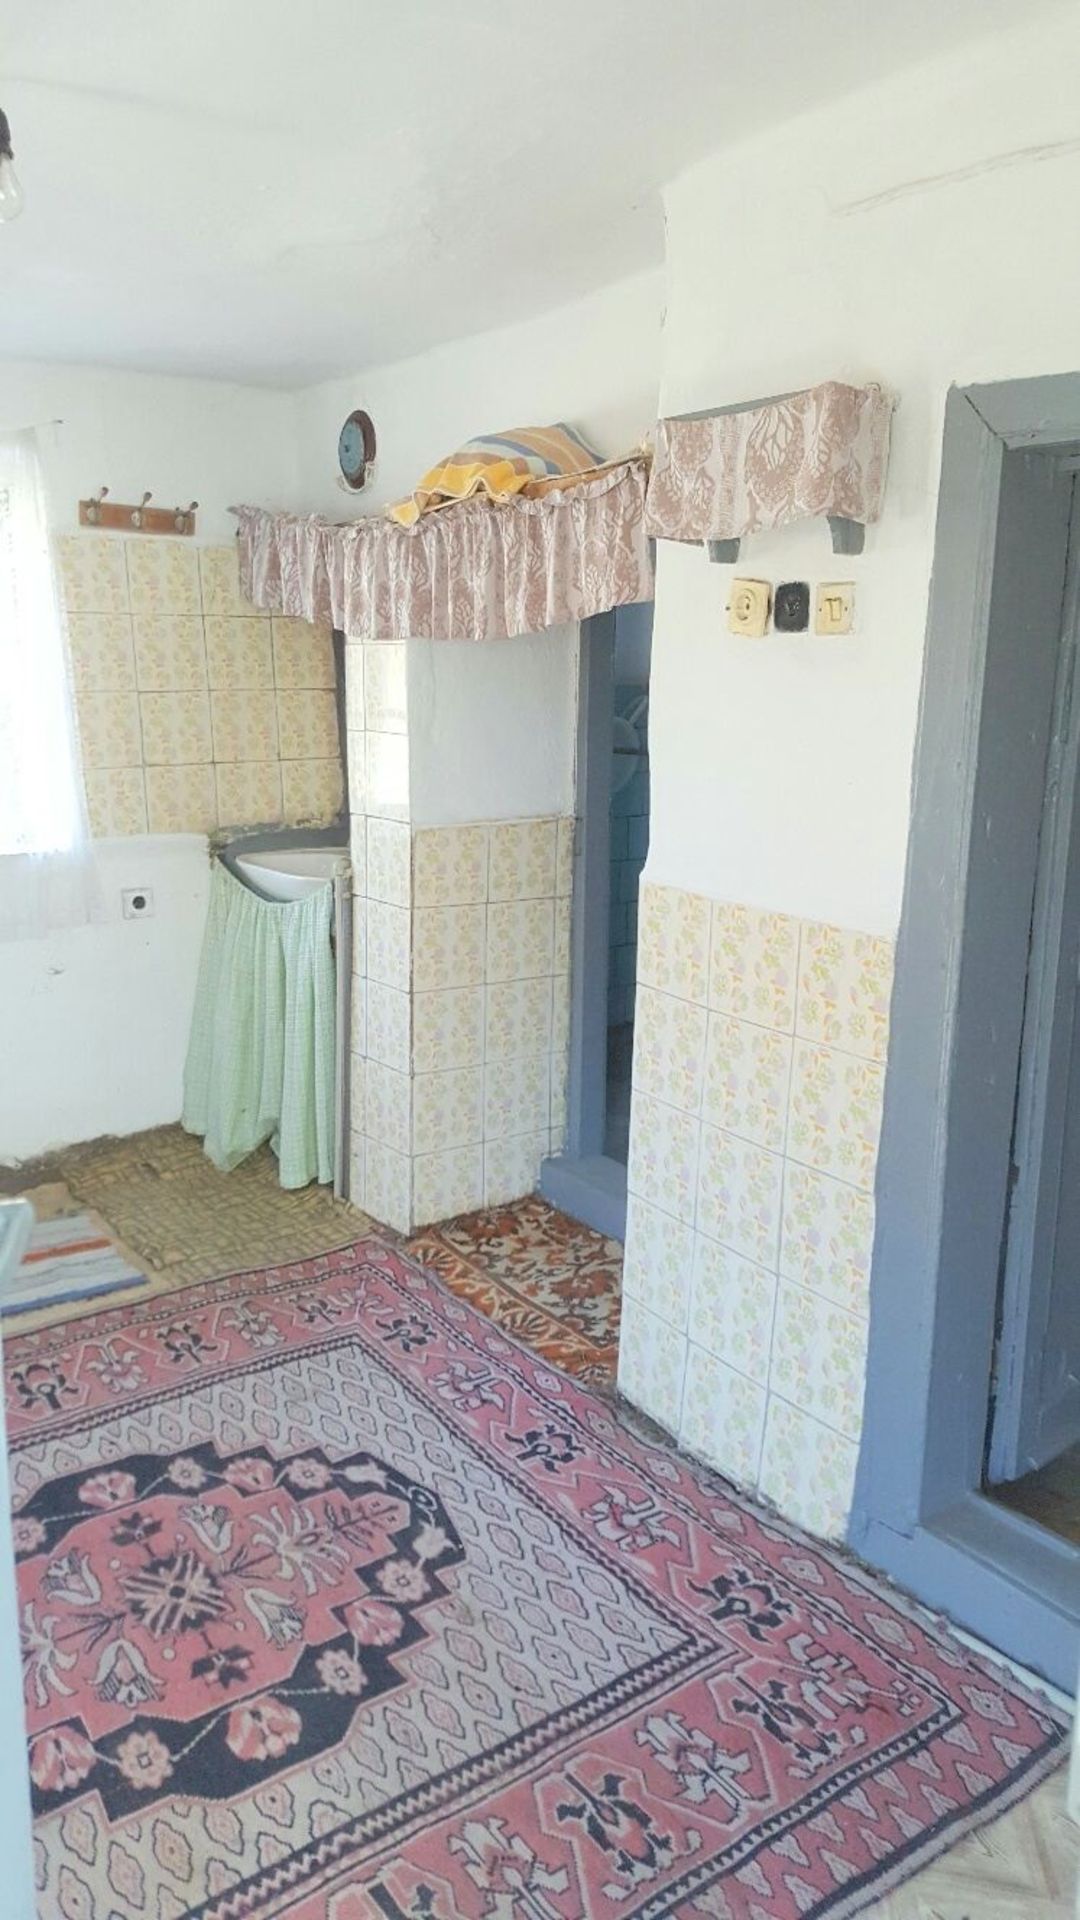 LARGE COTTAGE AND 1,050 SQM OF LAND IN IZVOROVO, BULGARIA - Image 14 of 38